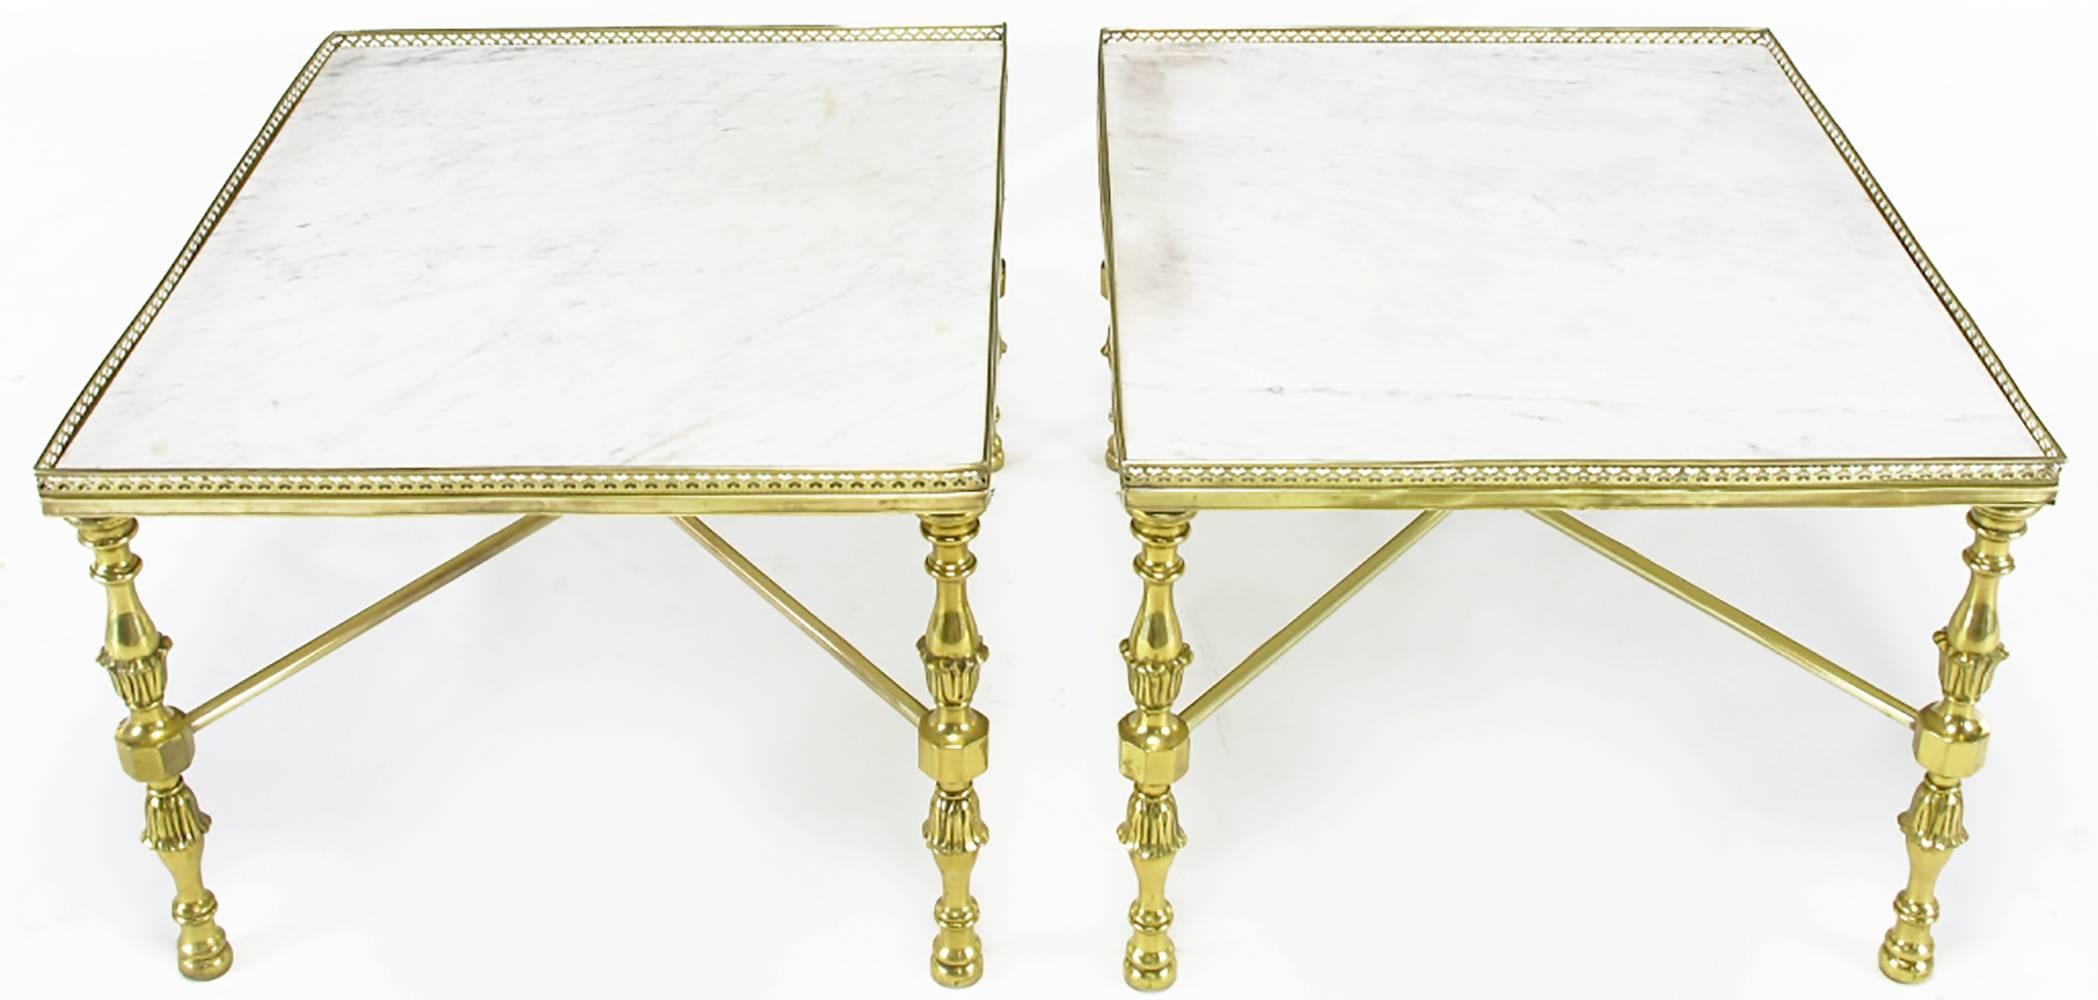 Brass Gallery and Carrara Marble Regency X-Base Side Tables For Sale 2